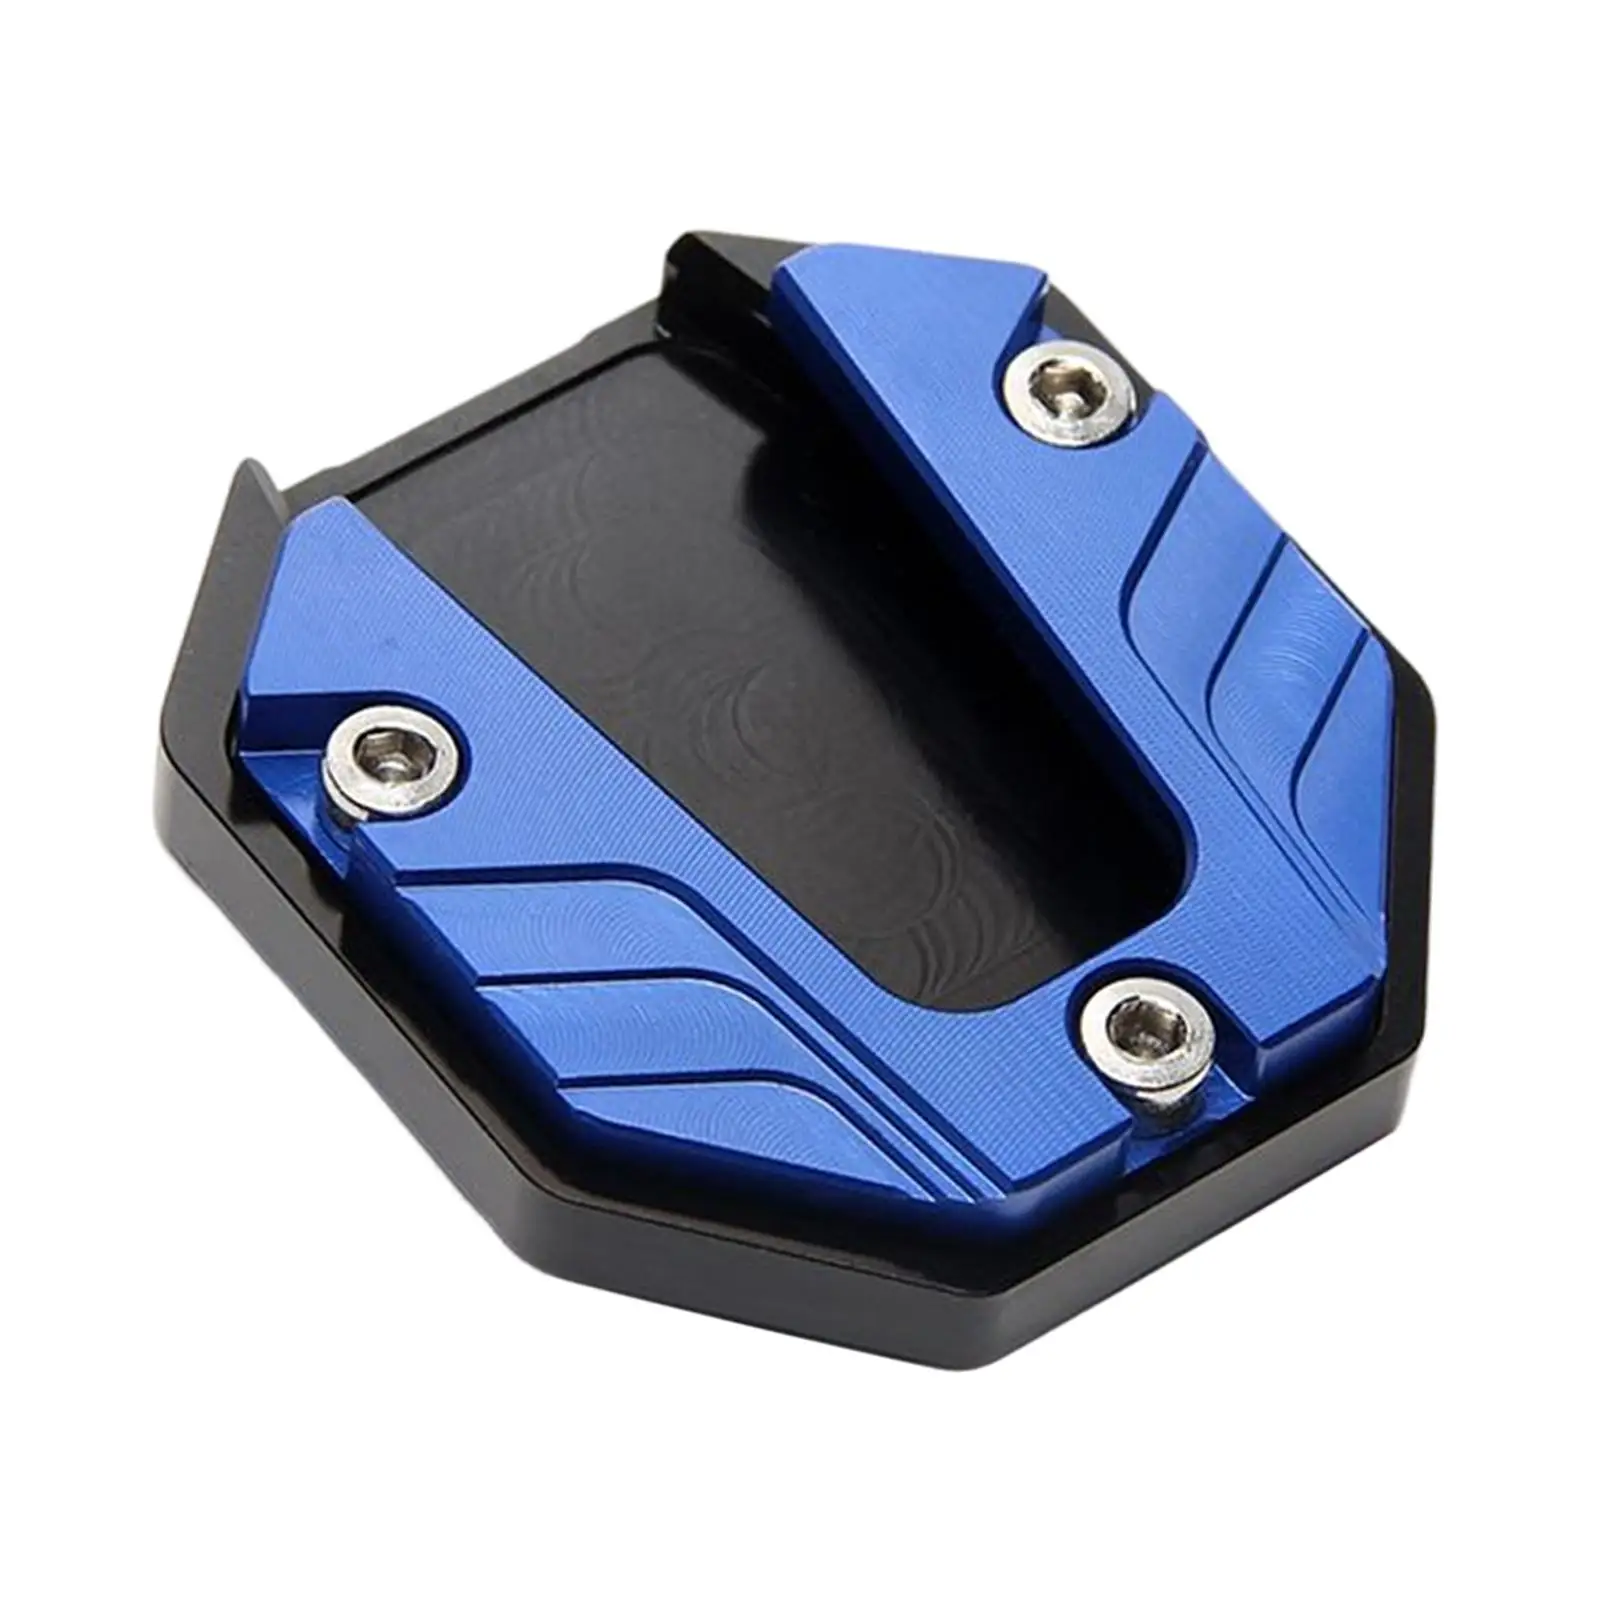 Motorcycle Kickstand Extension Pad Universal Replaces Accessories Easily Install Premium Stable Modification Aluminum Alloy